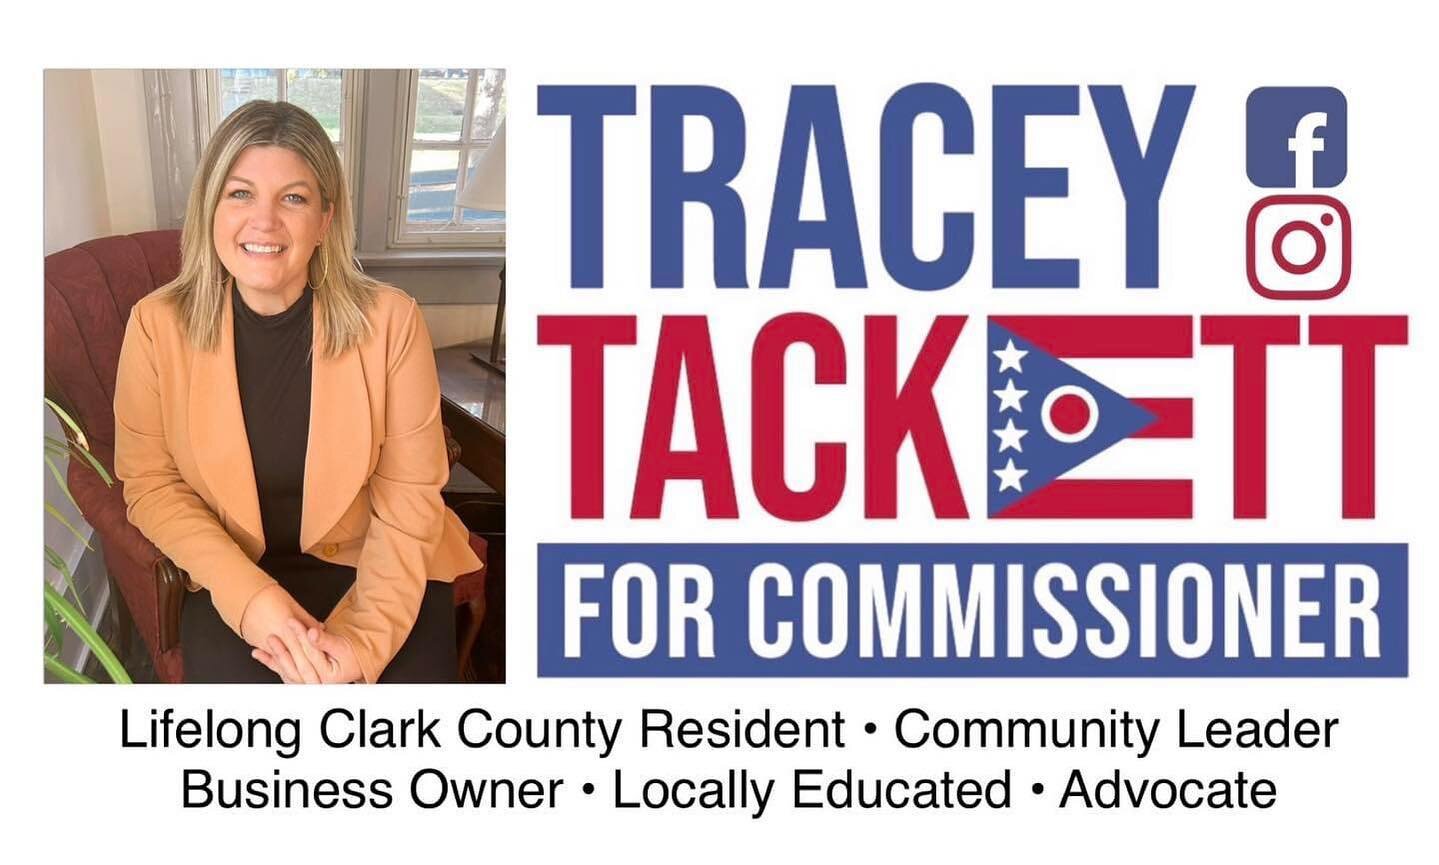 I spent the day in meetings listening to ideas and gathering information on the youth in our city. Connecting the dots and building bridges is one thing I will excel at. Learn more about my campaign at traceytackett.com.